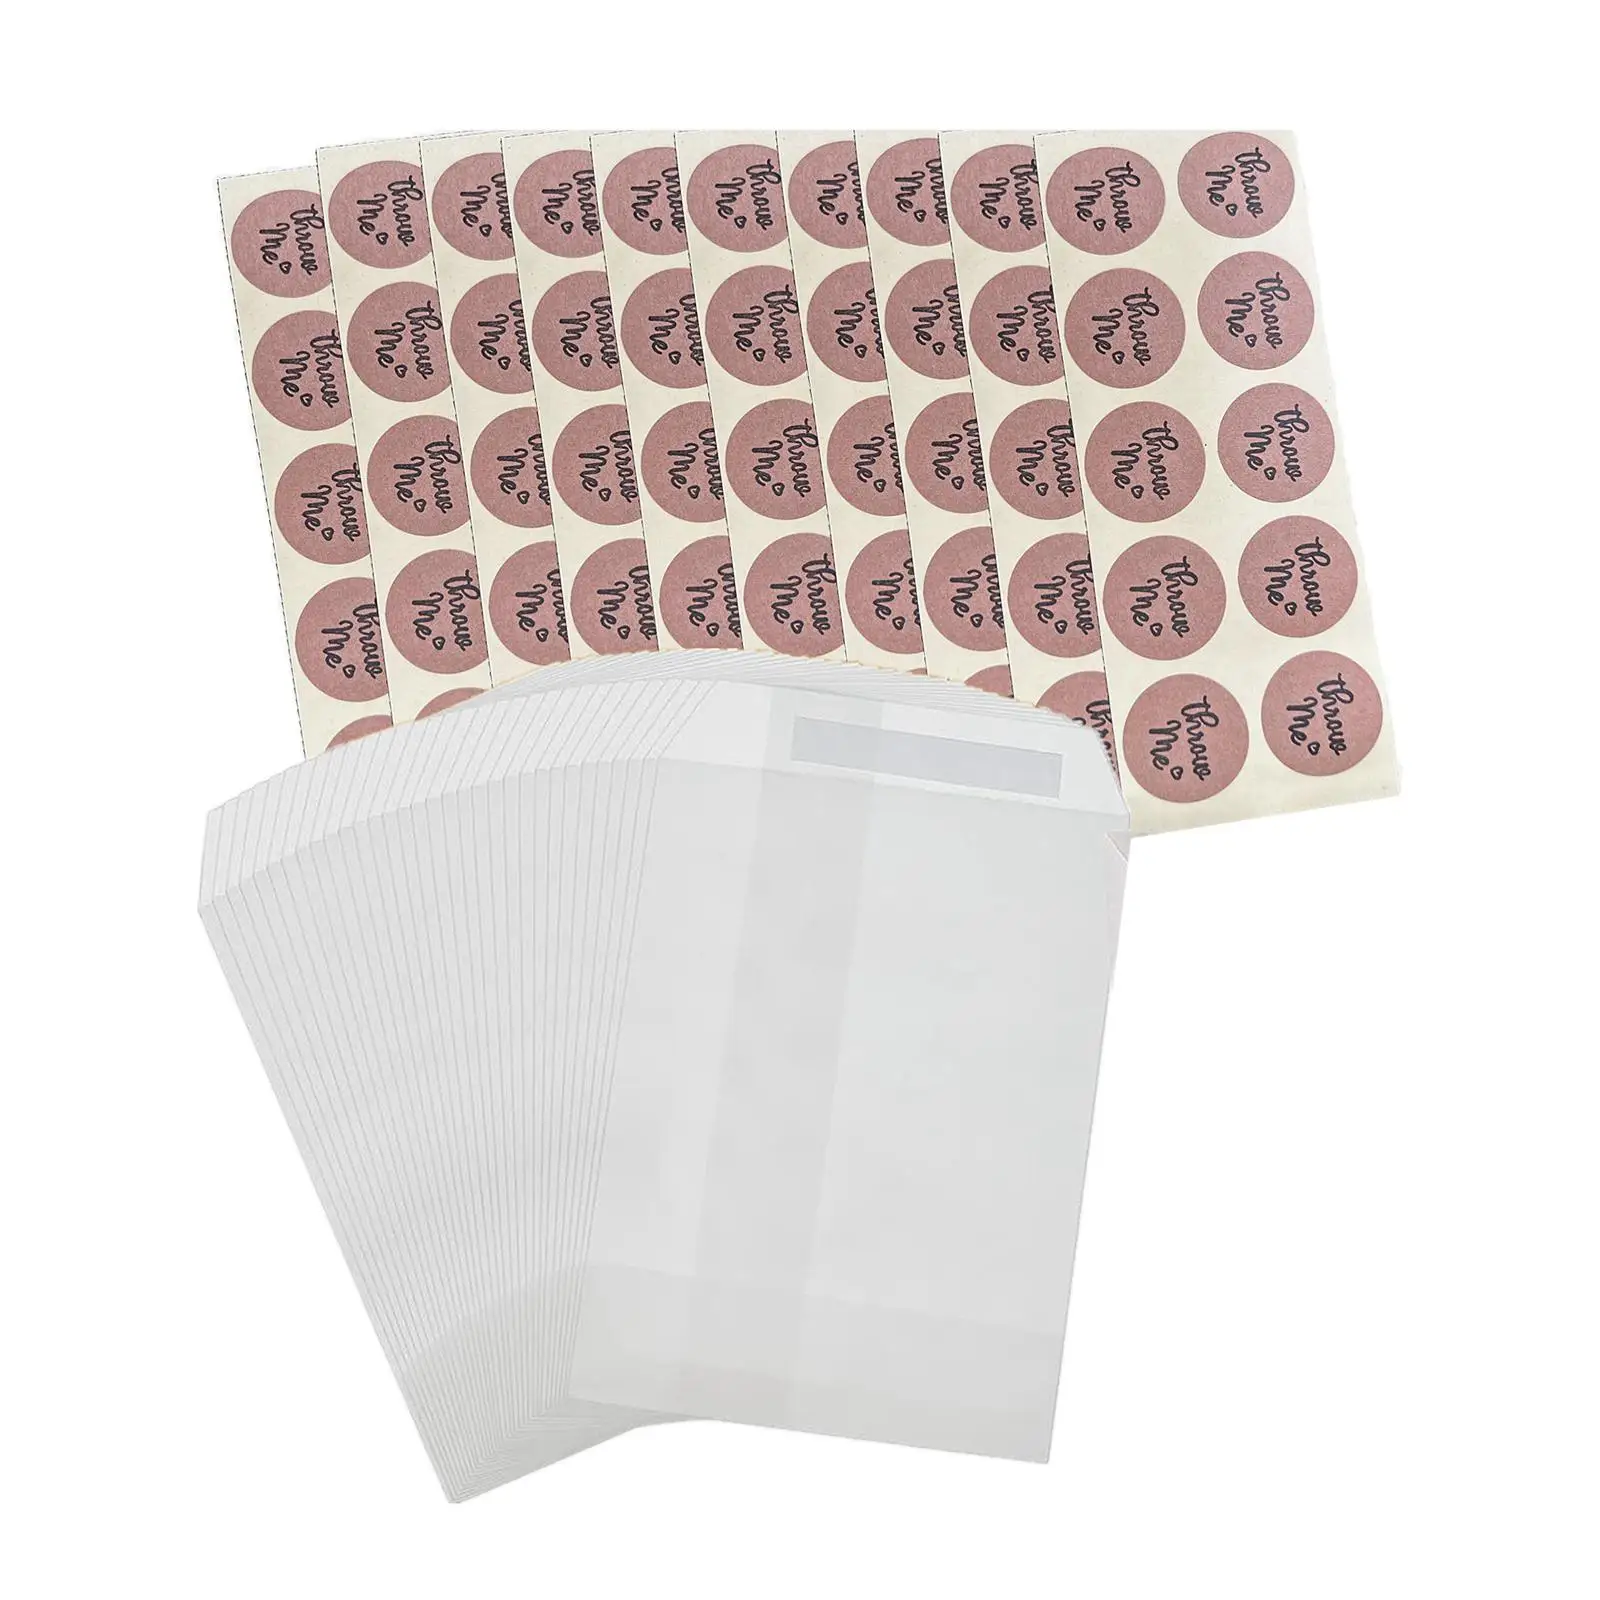 100Pcs Confetti Bags with Stickers Multipurpose Wedding Favor Bags for Chocolate Petals Invitations Treats Birthday Parties